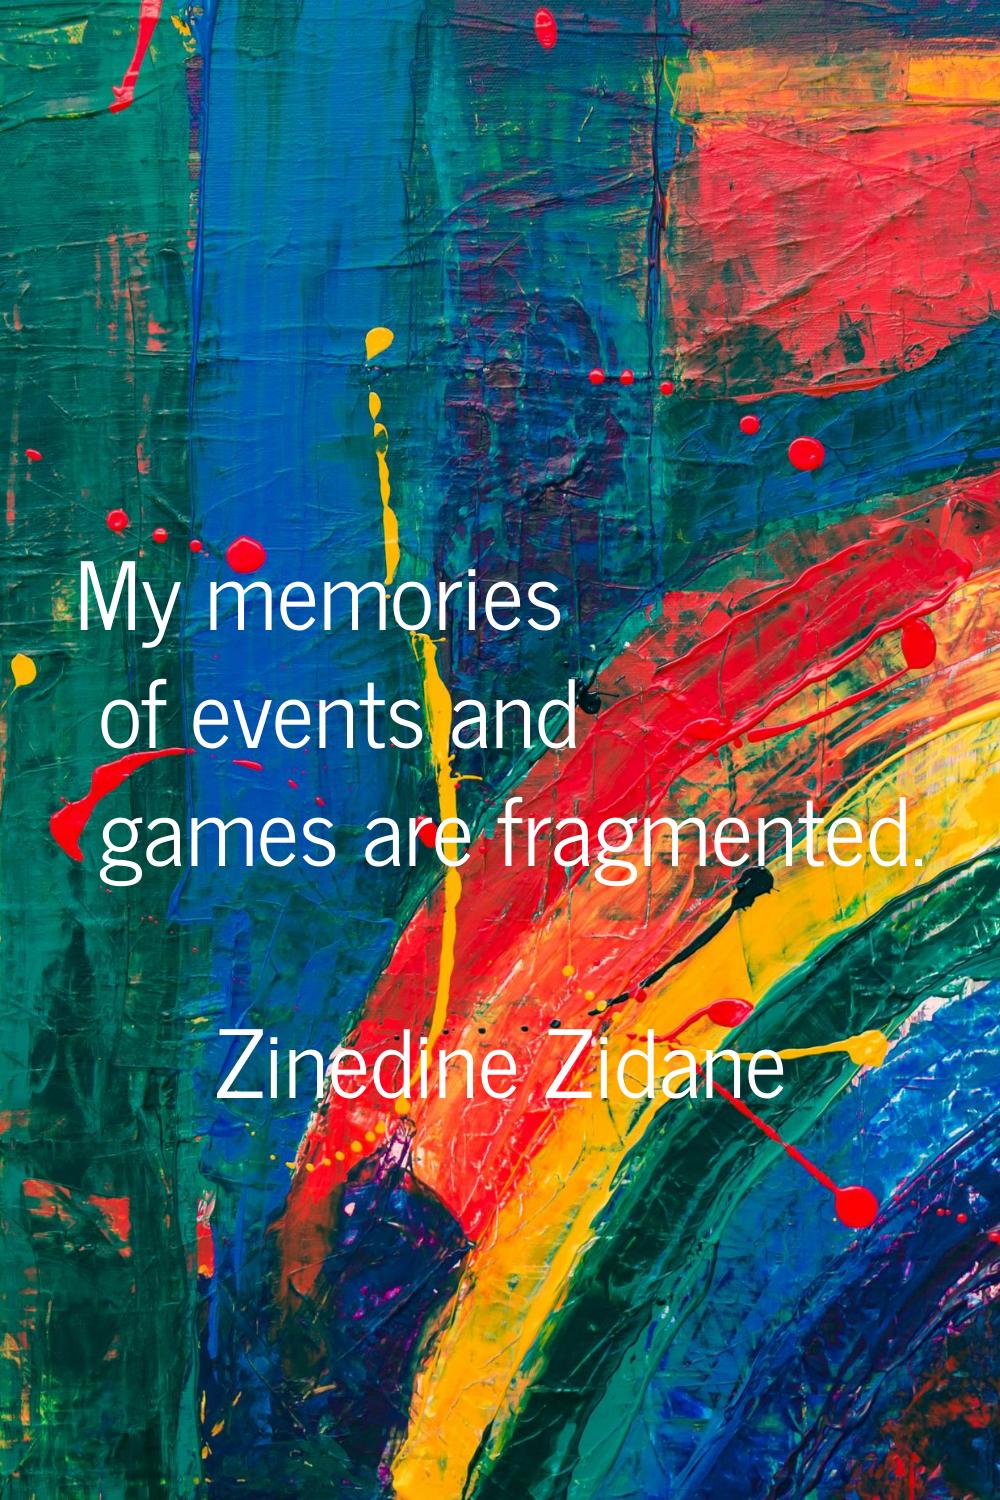 My memories of events and games are fragmented.